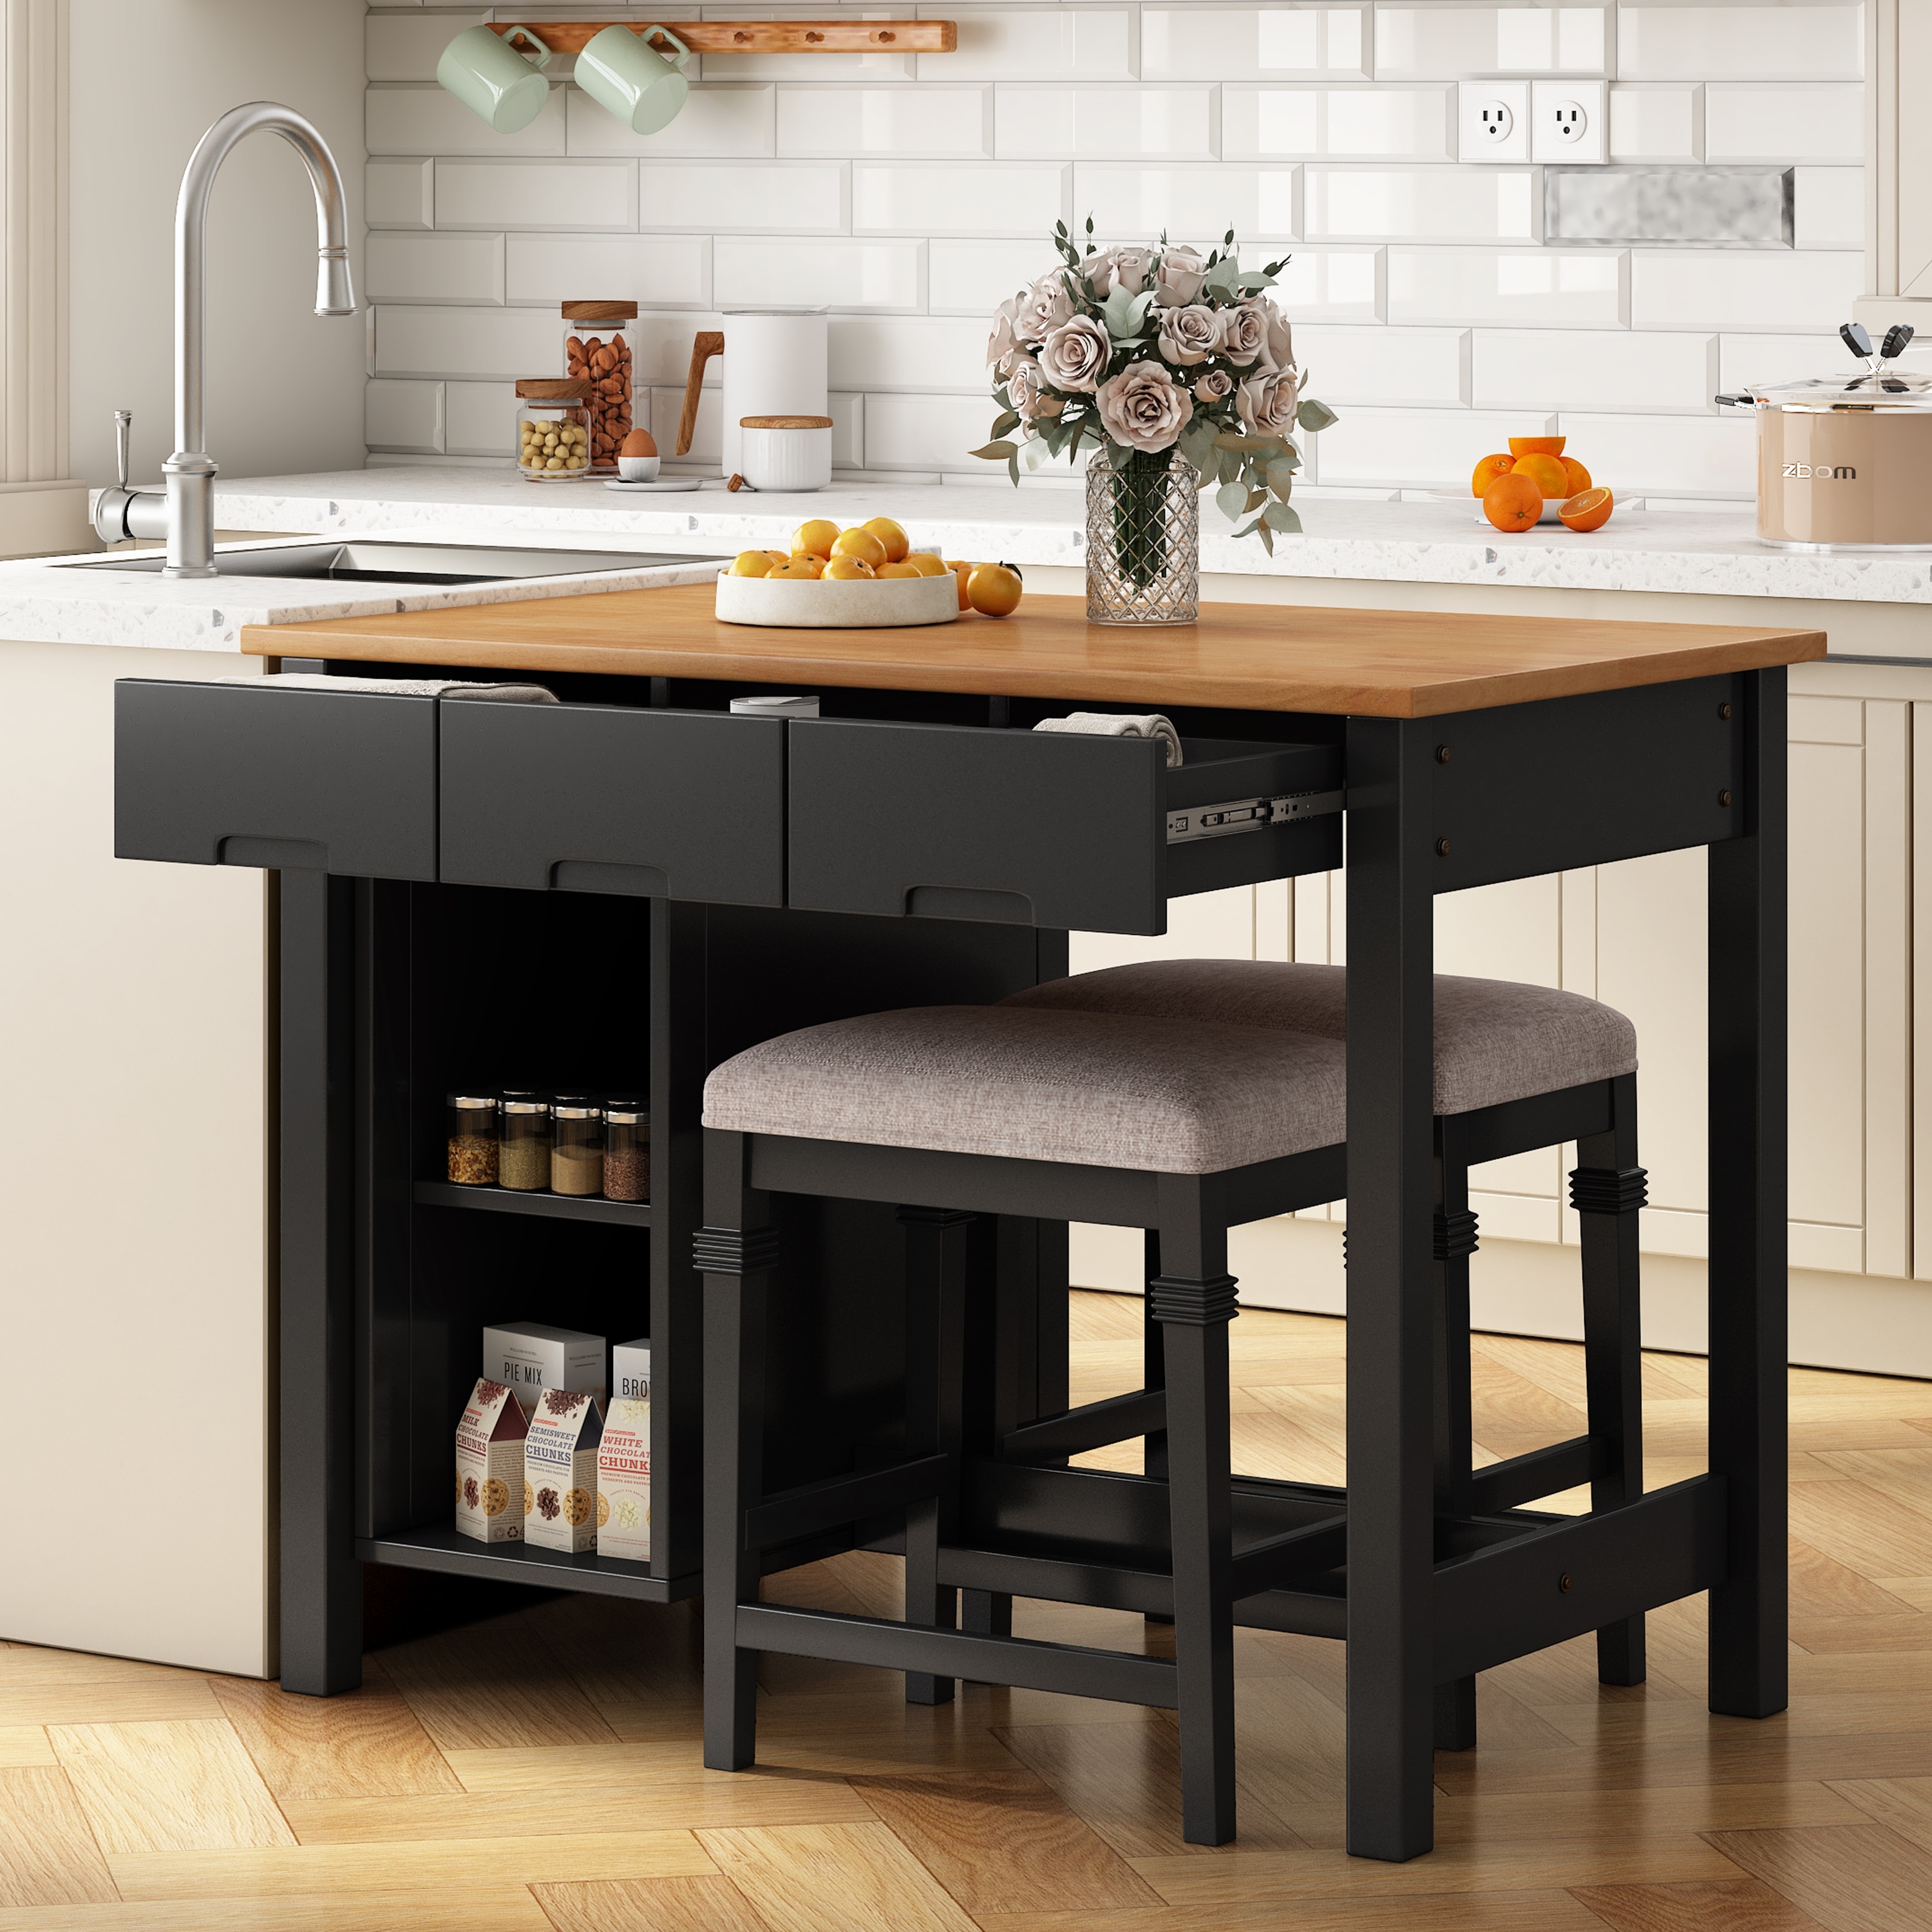 https://ak1.ostkcdn.com/images/products/is/images/direct/45cd8a198b33ca67ce28aeb4b5ad2c6438f8db63/Farmhouse-3-piece-45%22-Stationary-Wooden-Kitchen-Table-Set-with-2-Upholstered-Stools%2C-Dining-Table-Set-with-2-Shelves-%26-3-Drawers.jpg